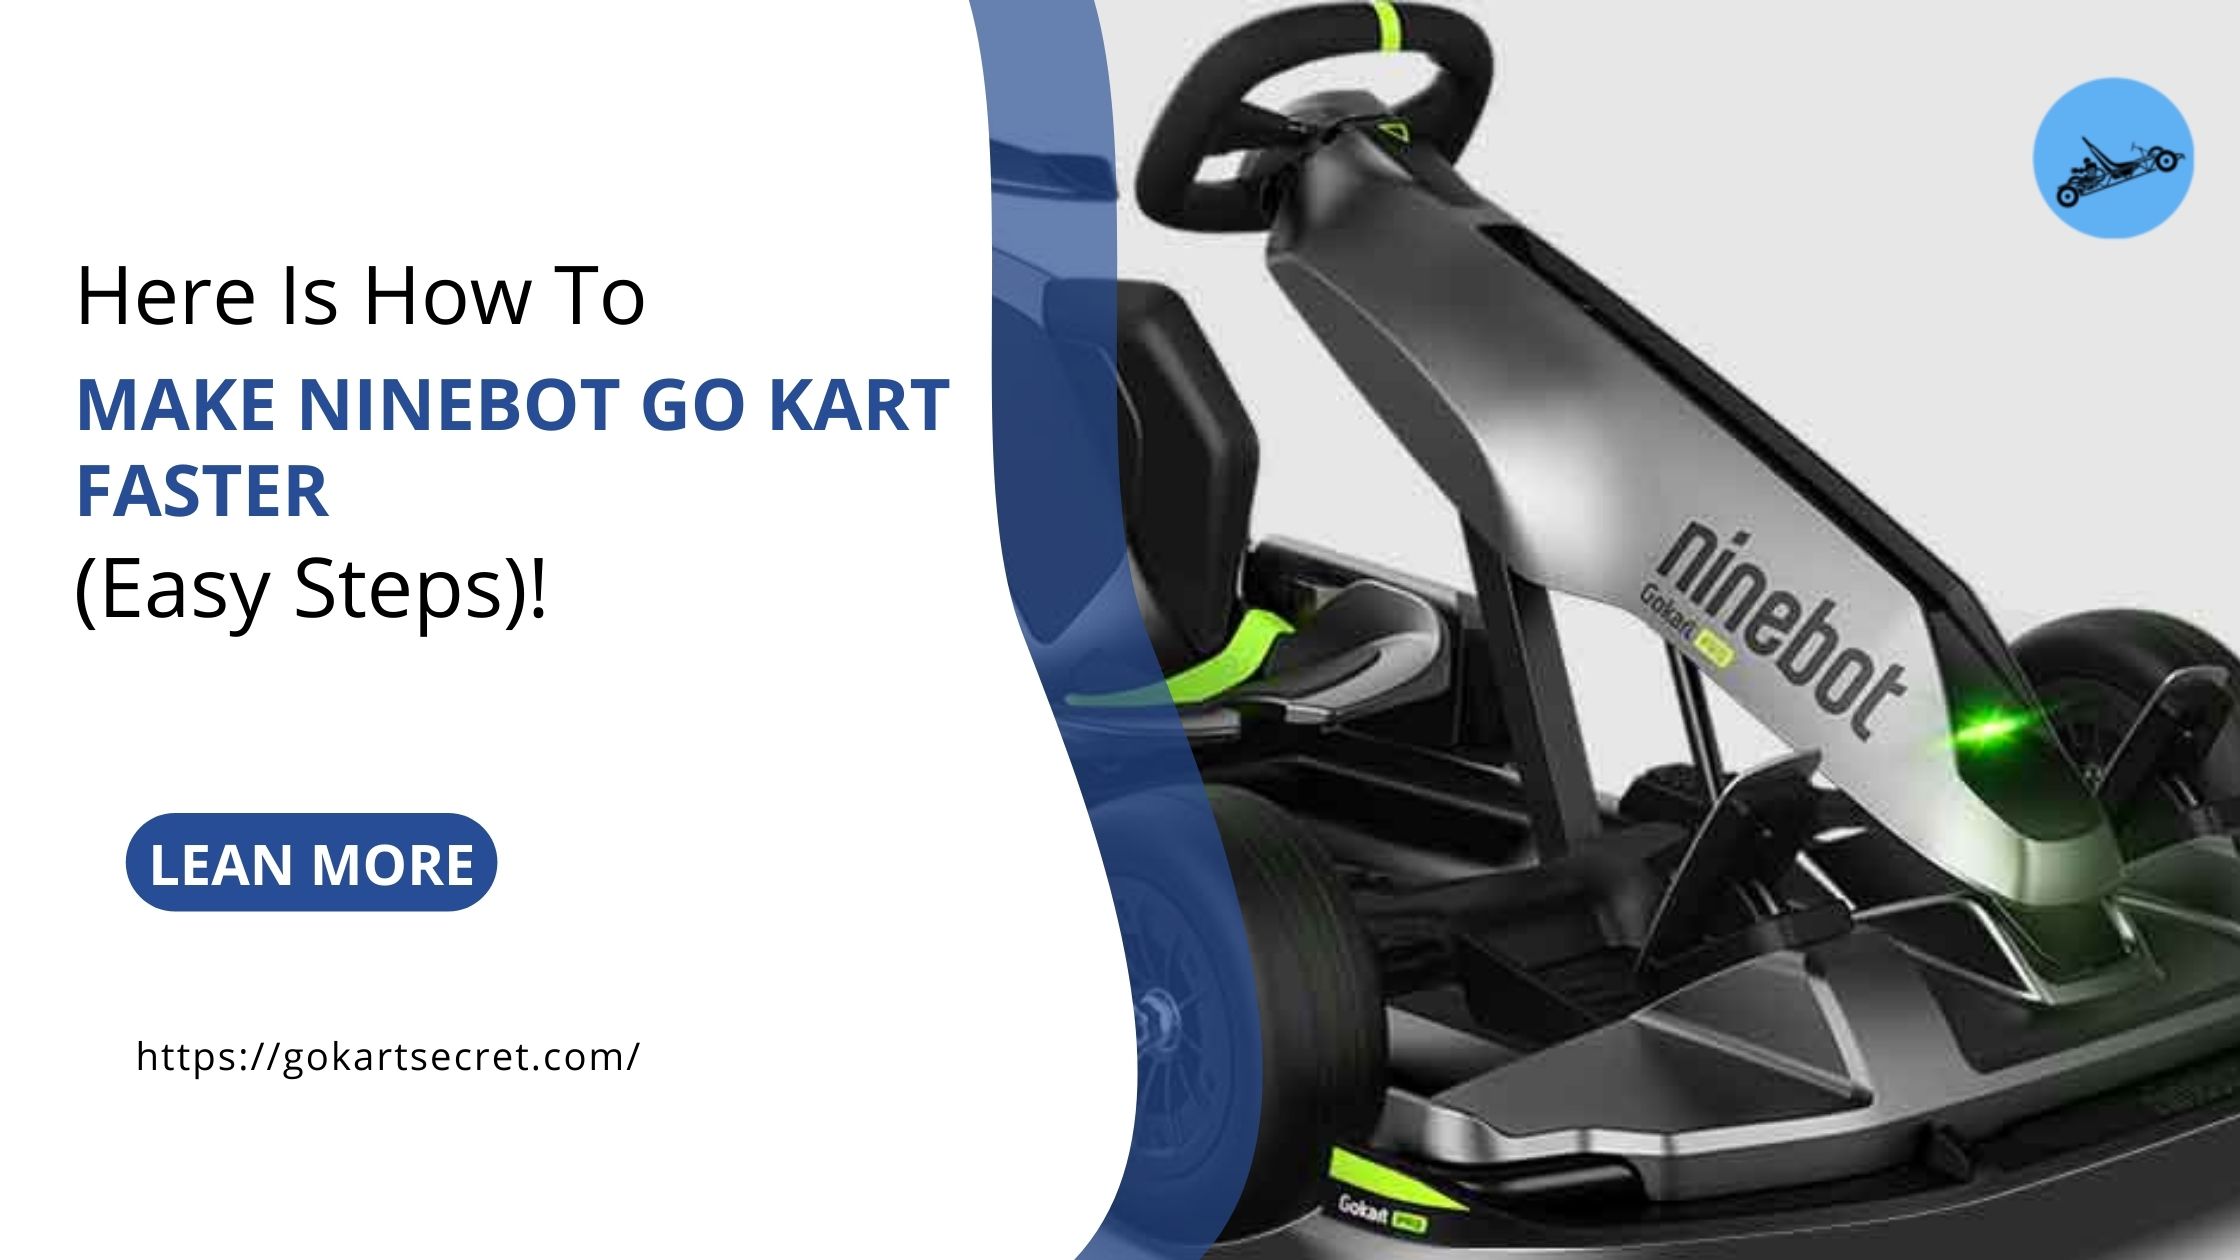 Here Is How To Make Ninebot Go Kart Faster (Easy Steps)